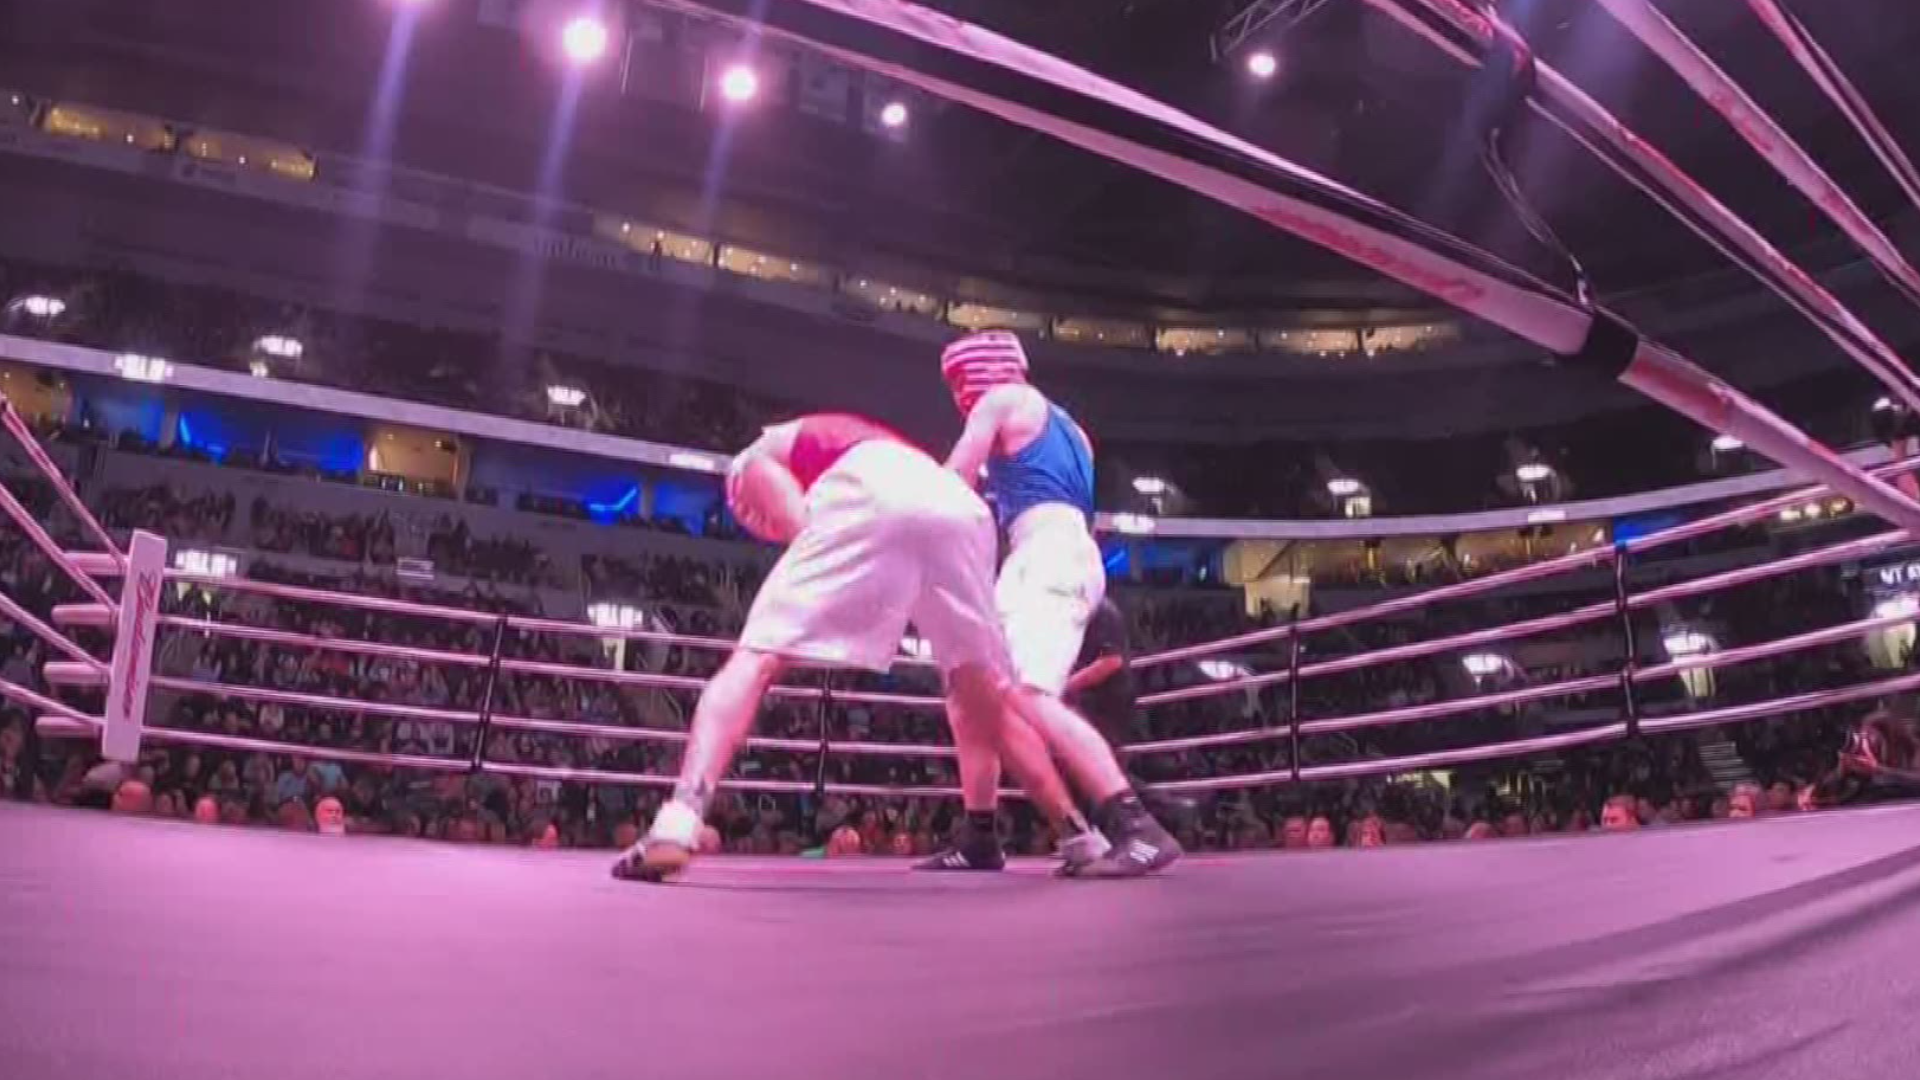 Firefighters, police officers and first responders went glove-to-glove inside the ring for Guns N Hoses... all for a good cause.